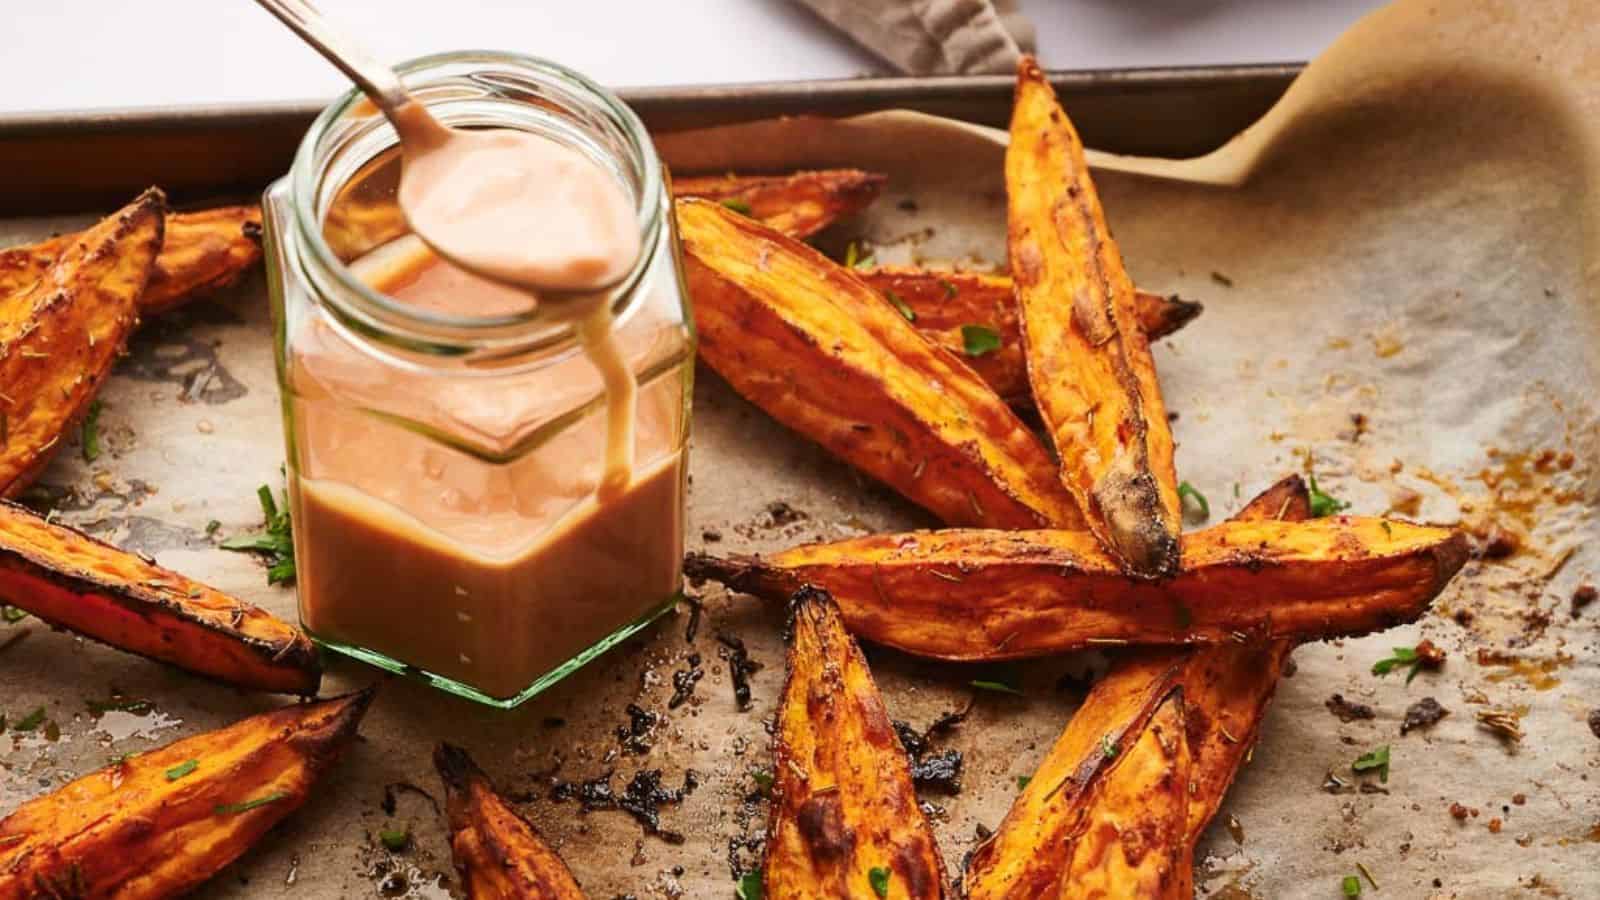 Maple ketchup in a jar with a spoon about to drizzle it on sweet potato wedges.